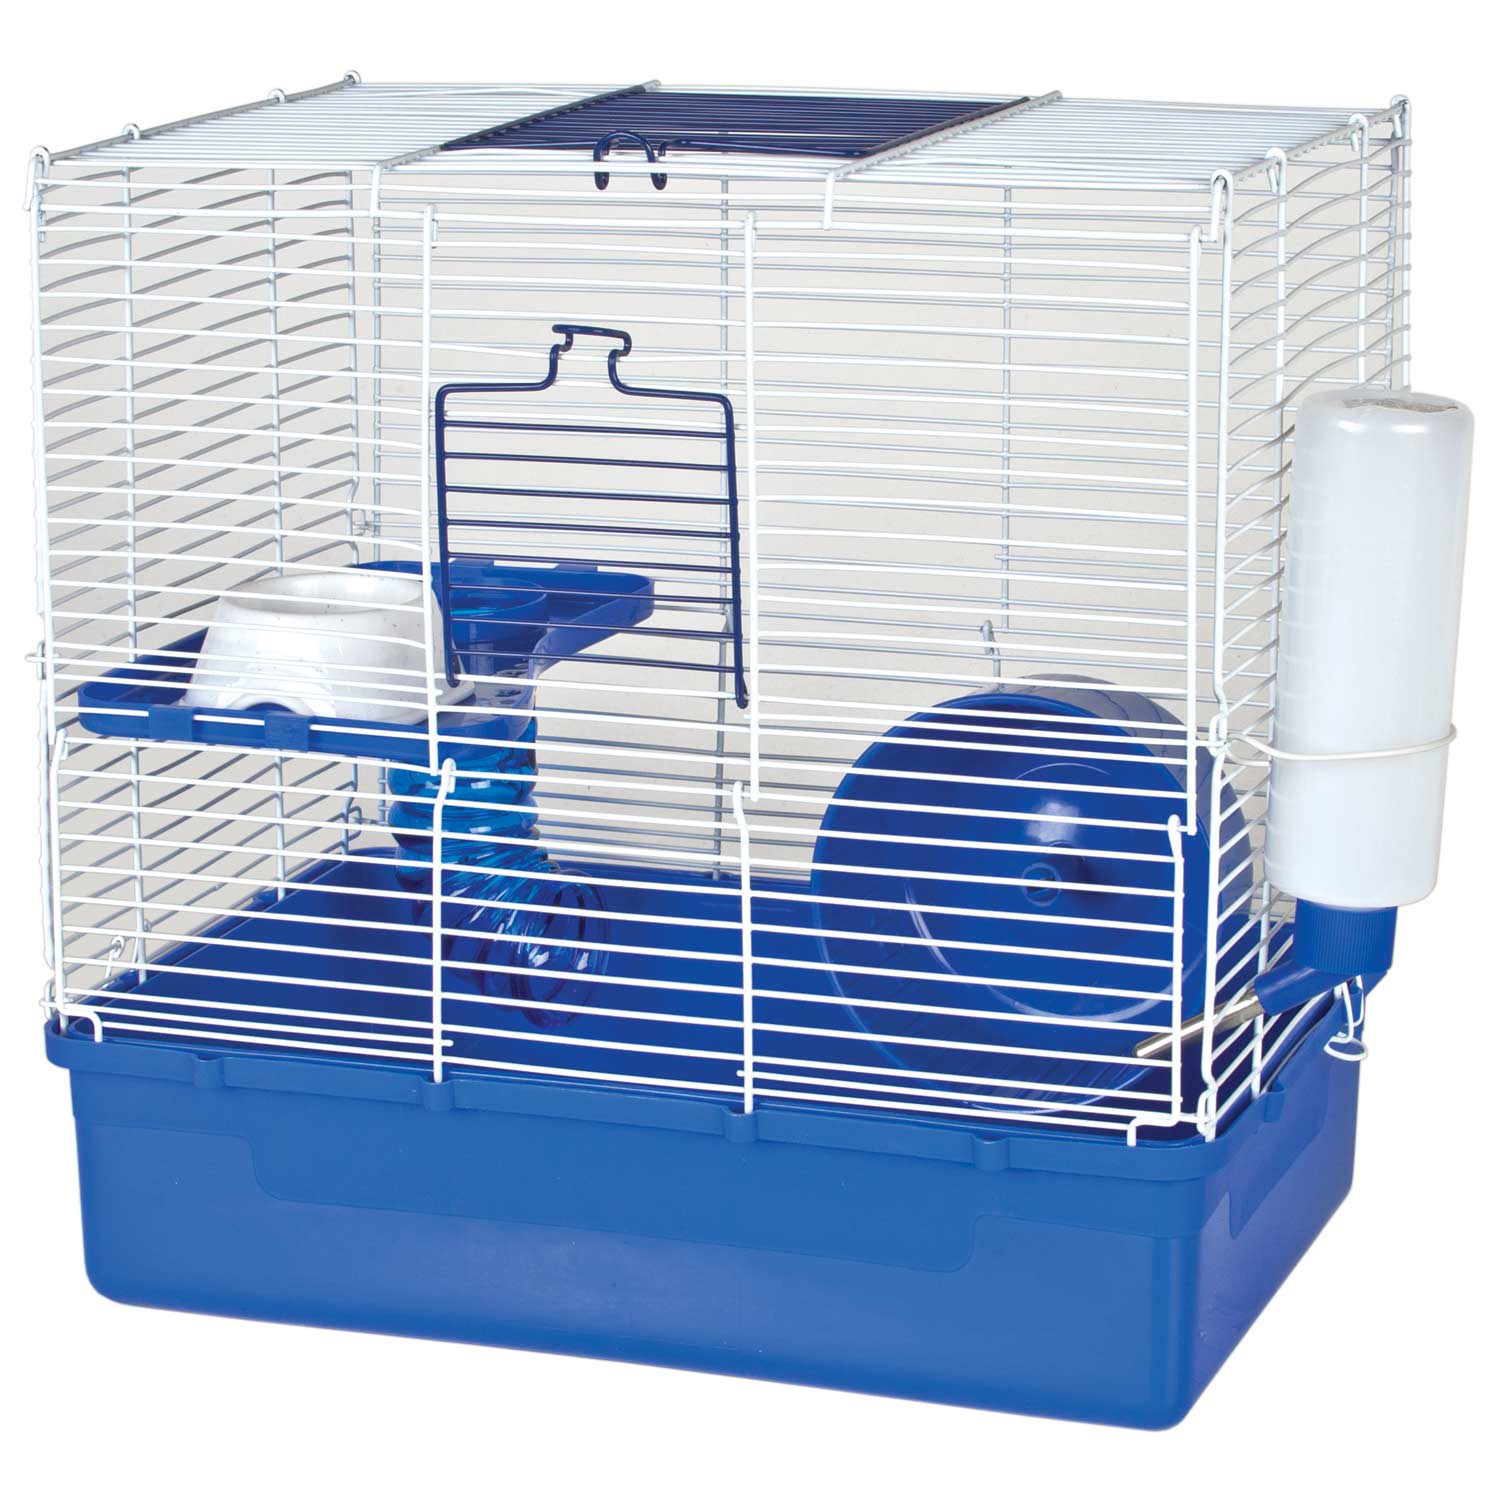 buy hamster cage